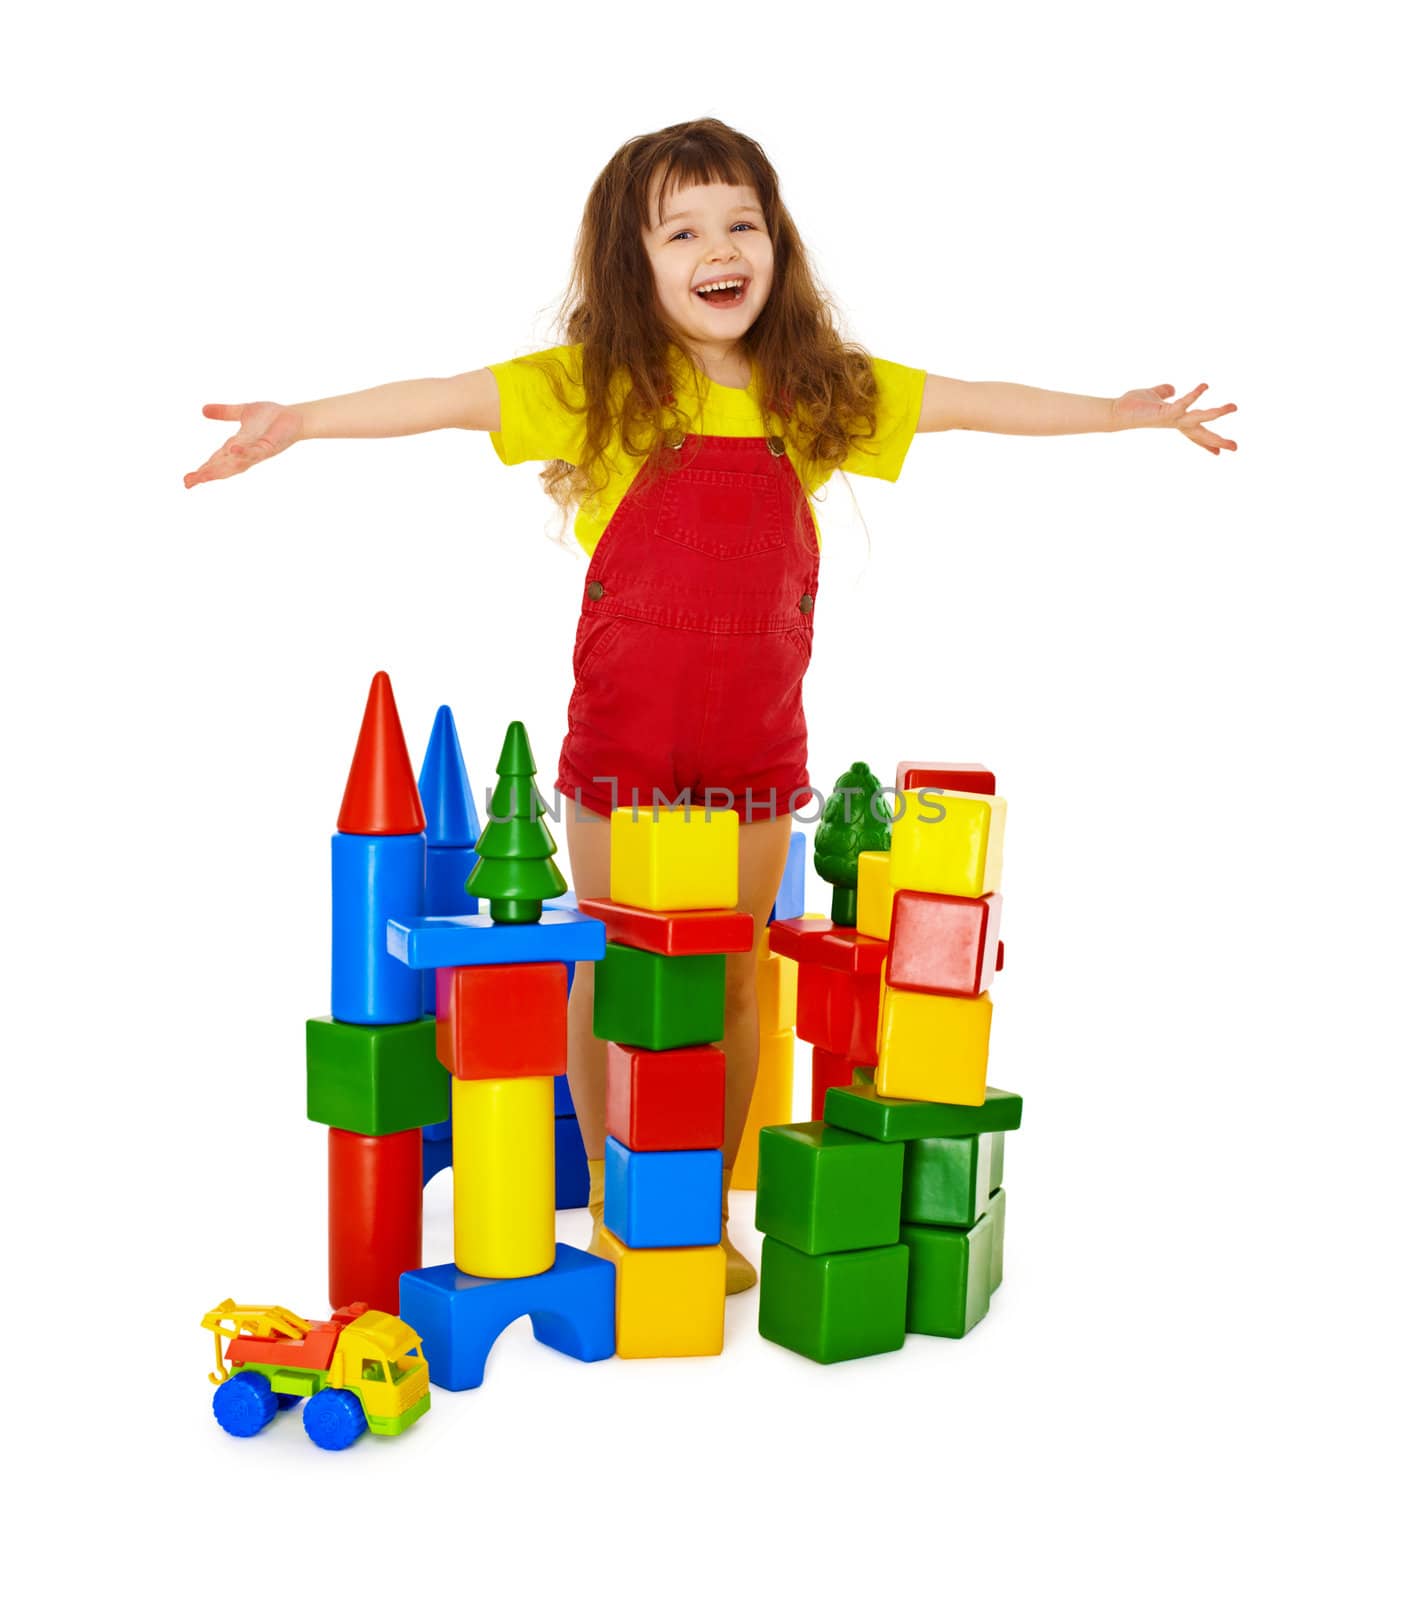 Happy child in a toy castle by pzaxe